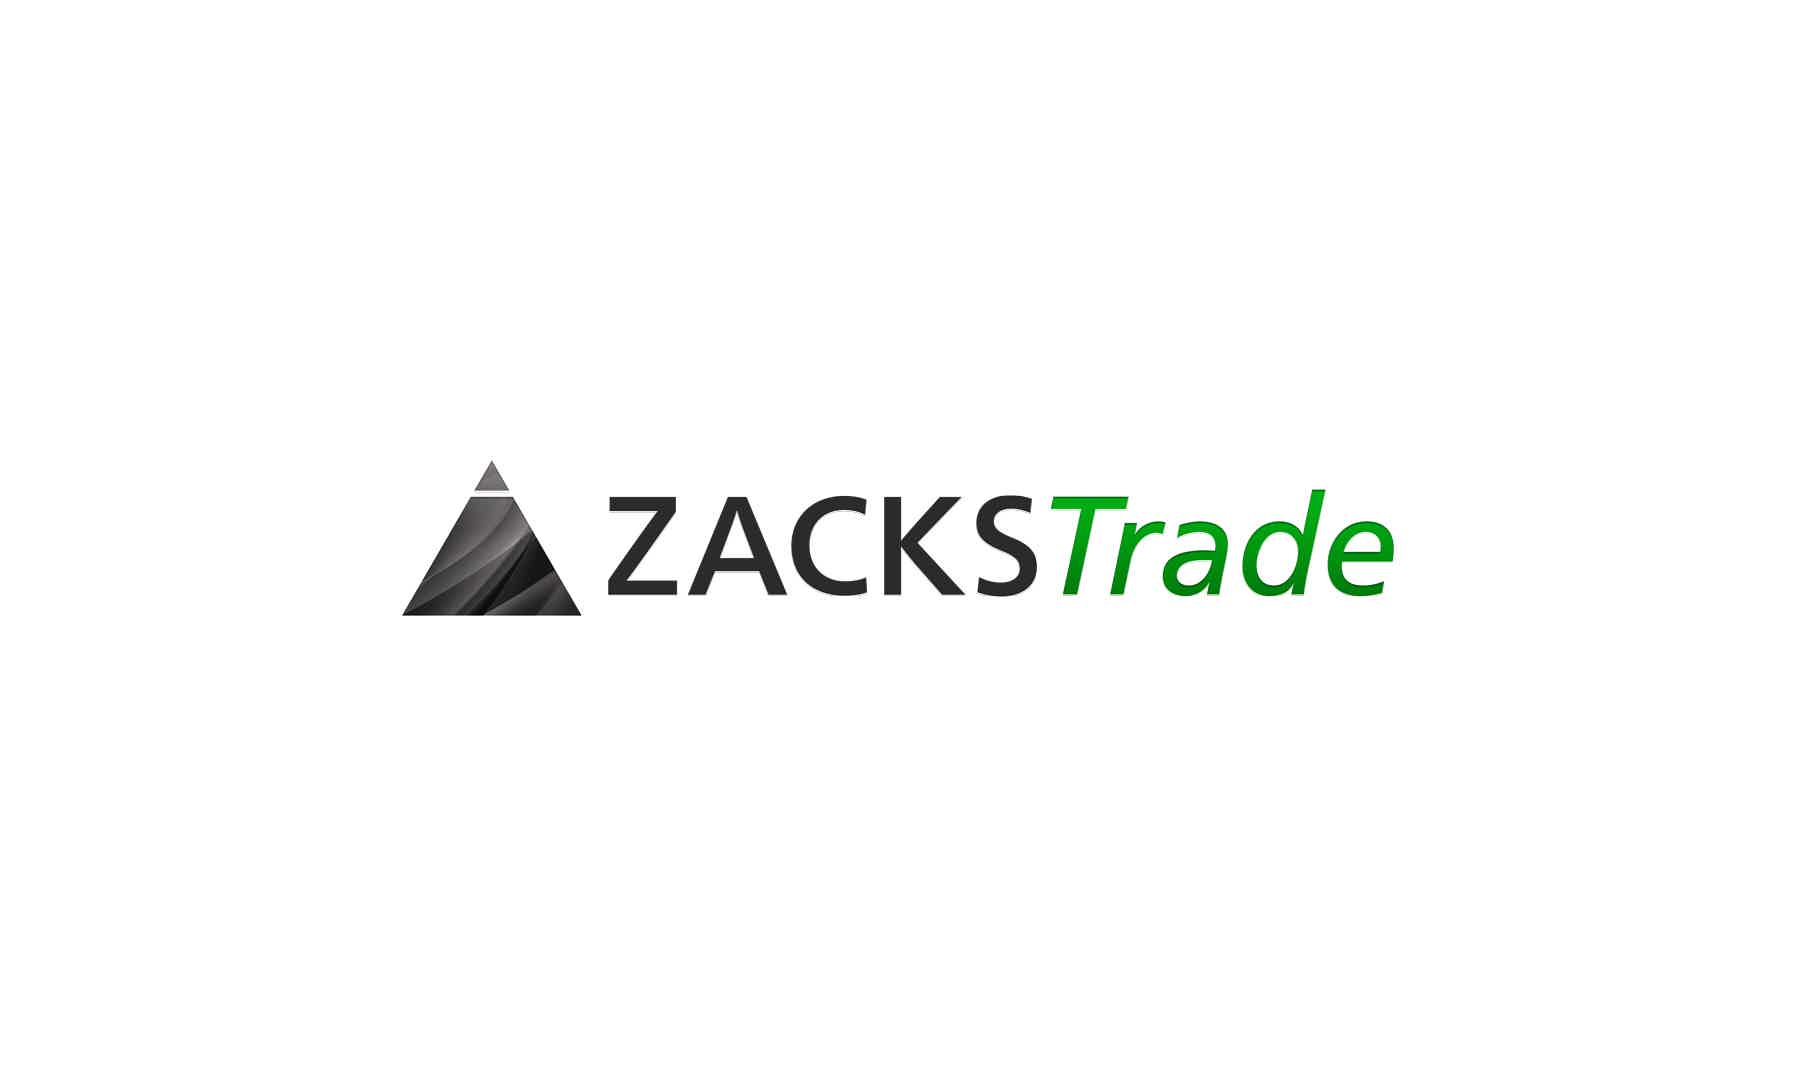 Find out how the application process works! Source: Zacks Trade.